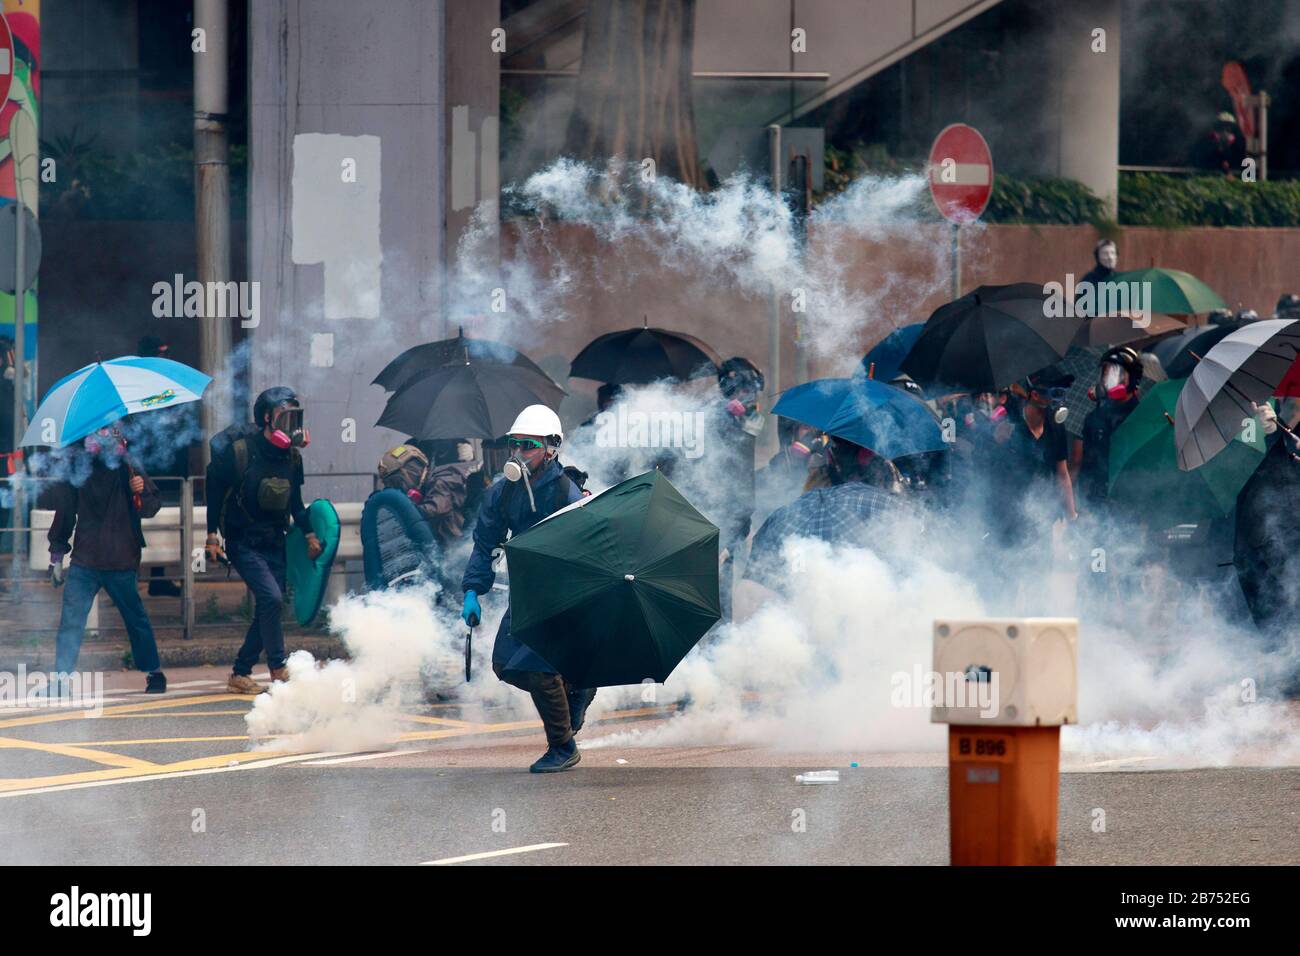 Protesters clash with Anti-riot police during an unauthorised global anti-totalitarian march in Hong Kong, China. Stock Photo